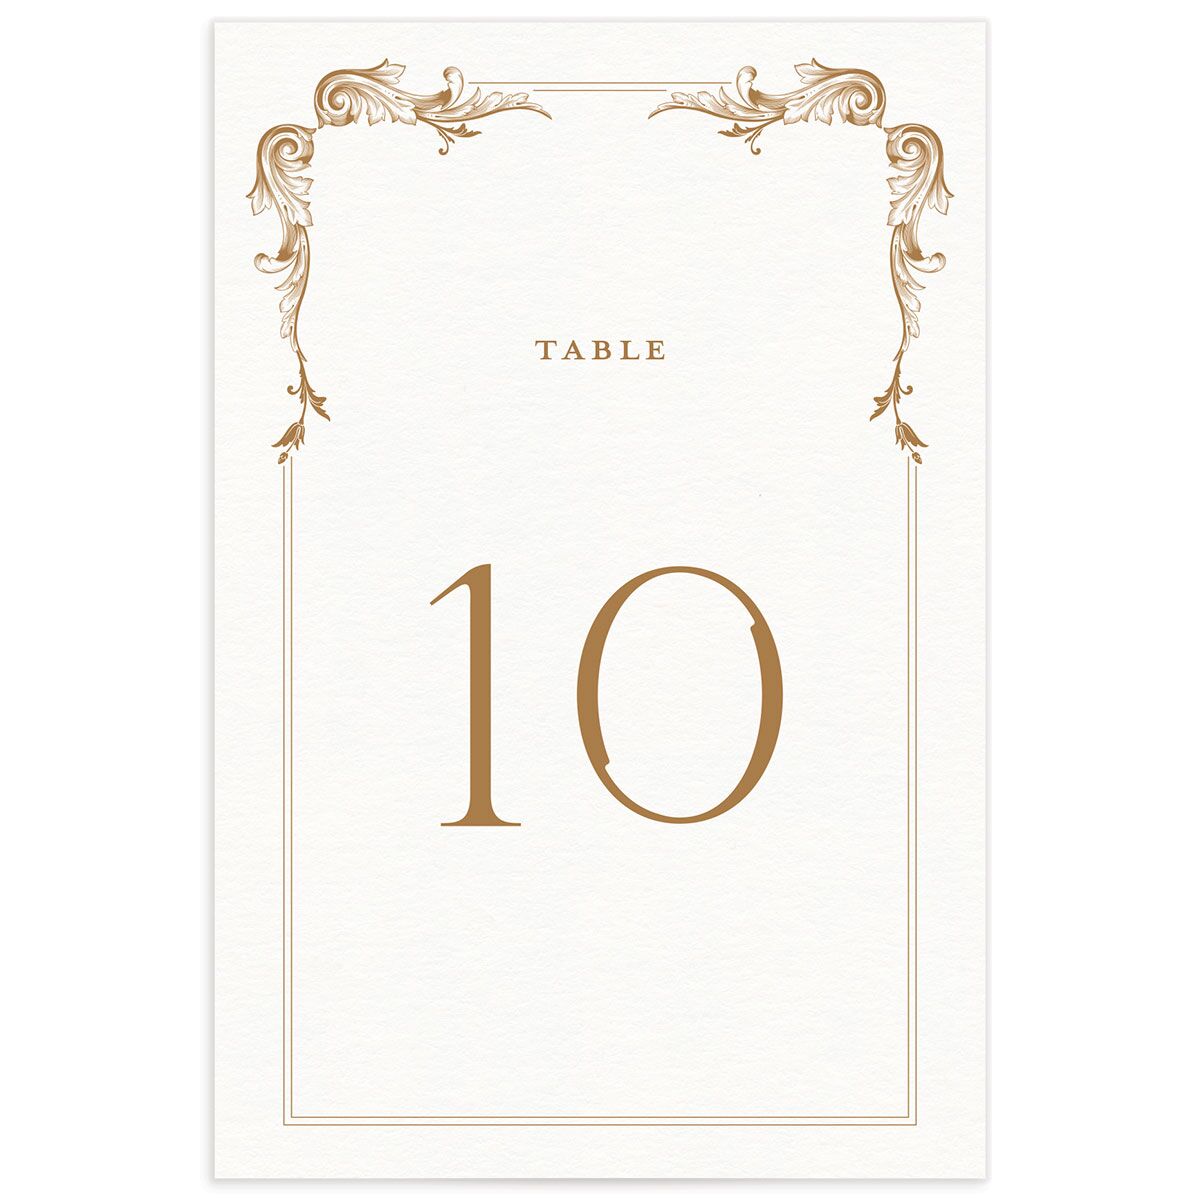 Vintage Ornate Frame Table Numbers front in Gold